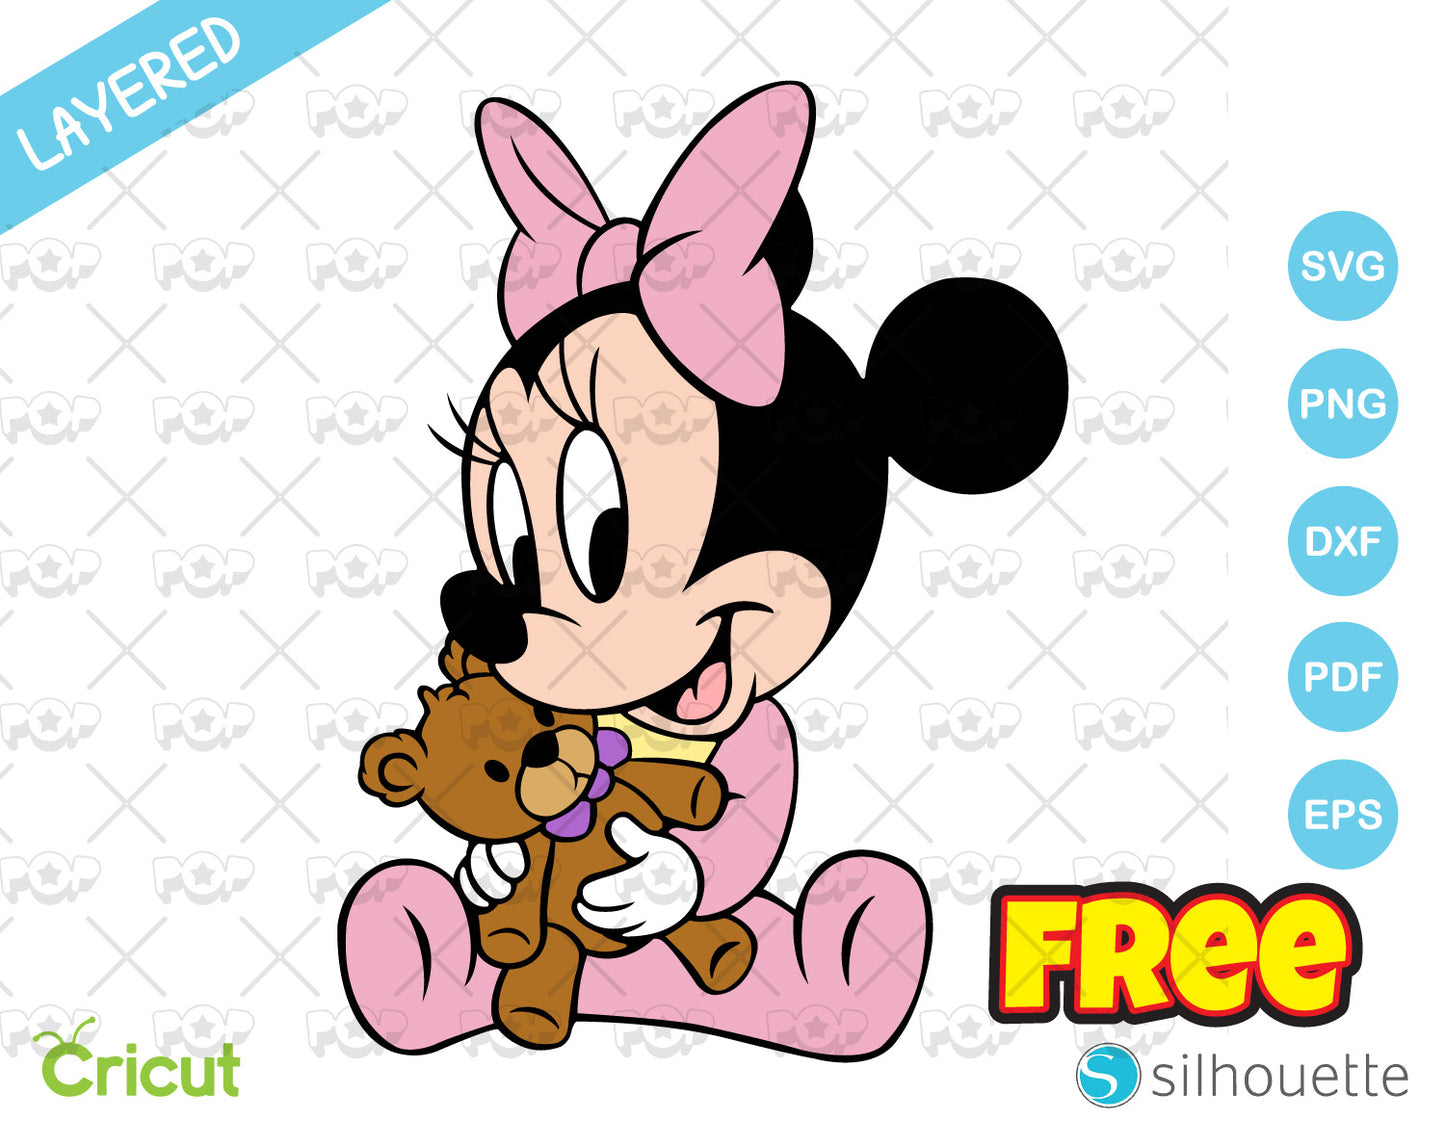 FREE Minnie clipart, Free Disney SVG cut file for cricut silhouette, SVG, PNG, DXF, instant download